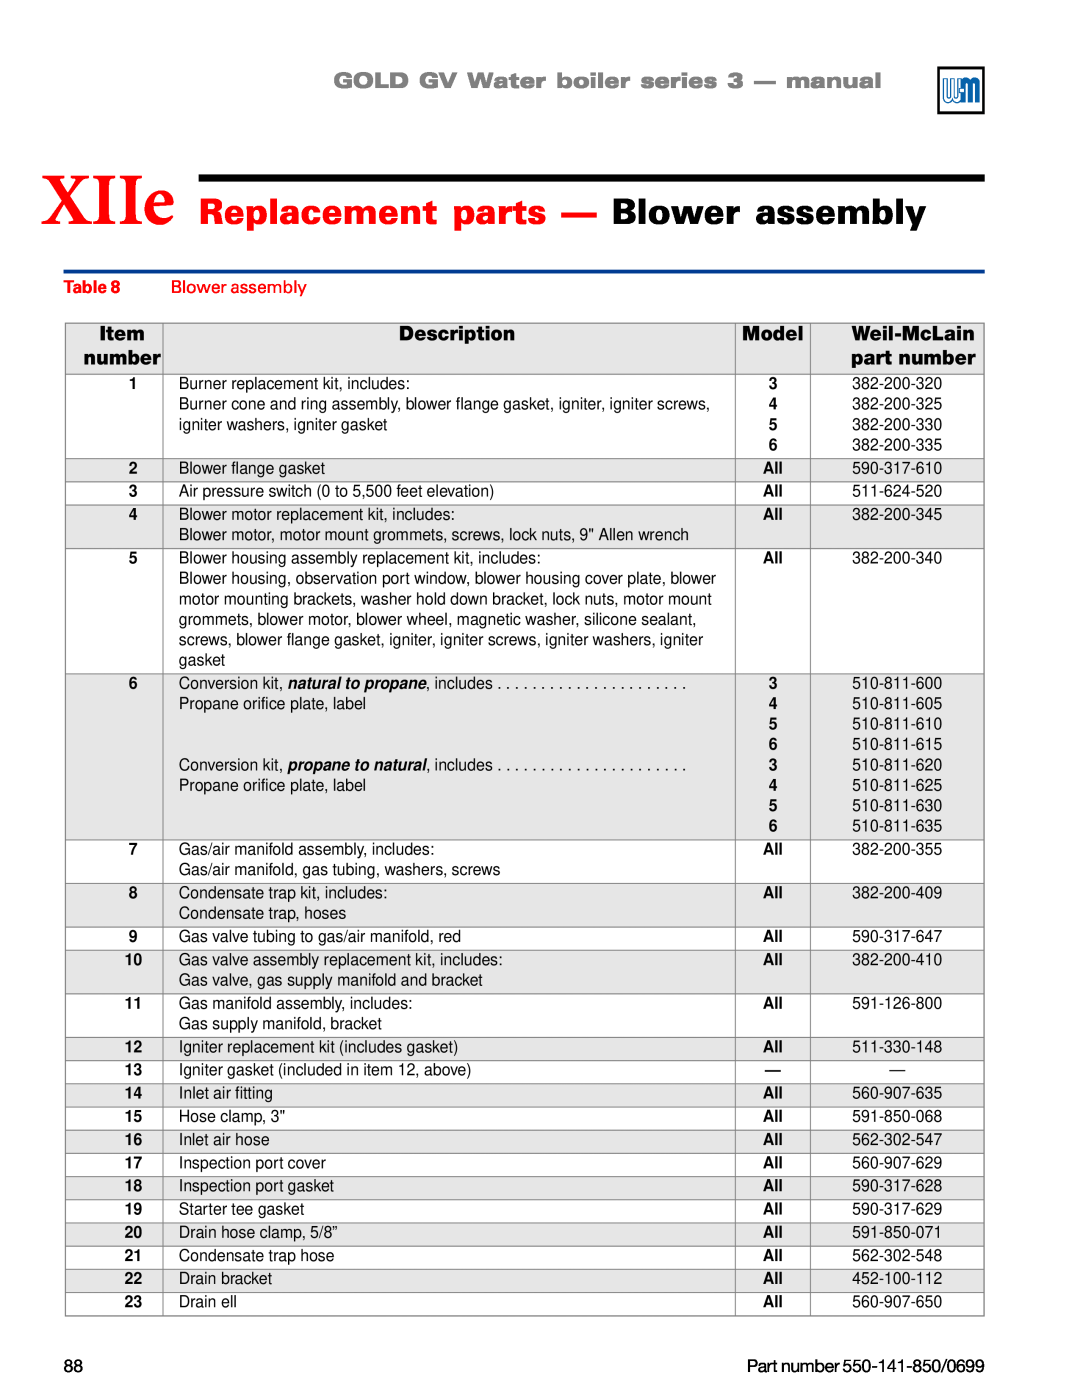 Weil-McLain GOLD DV WATER BOILER XIIe Replacement parts — Blower assembly, GOLD GV Water boiler series 3 — manual, Item 